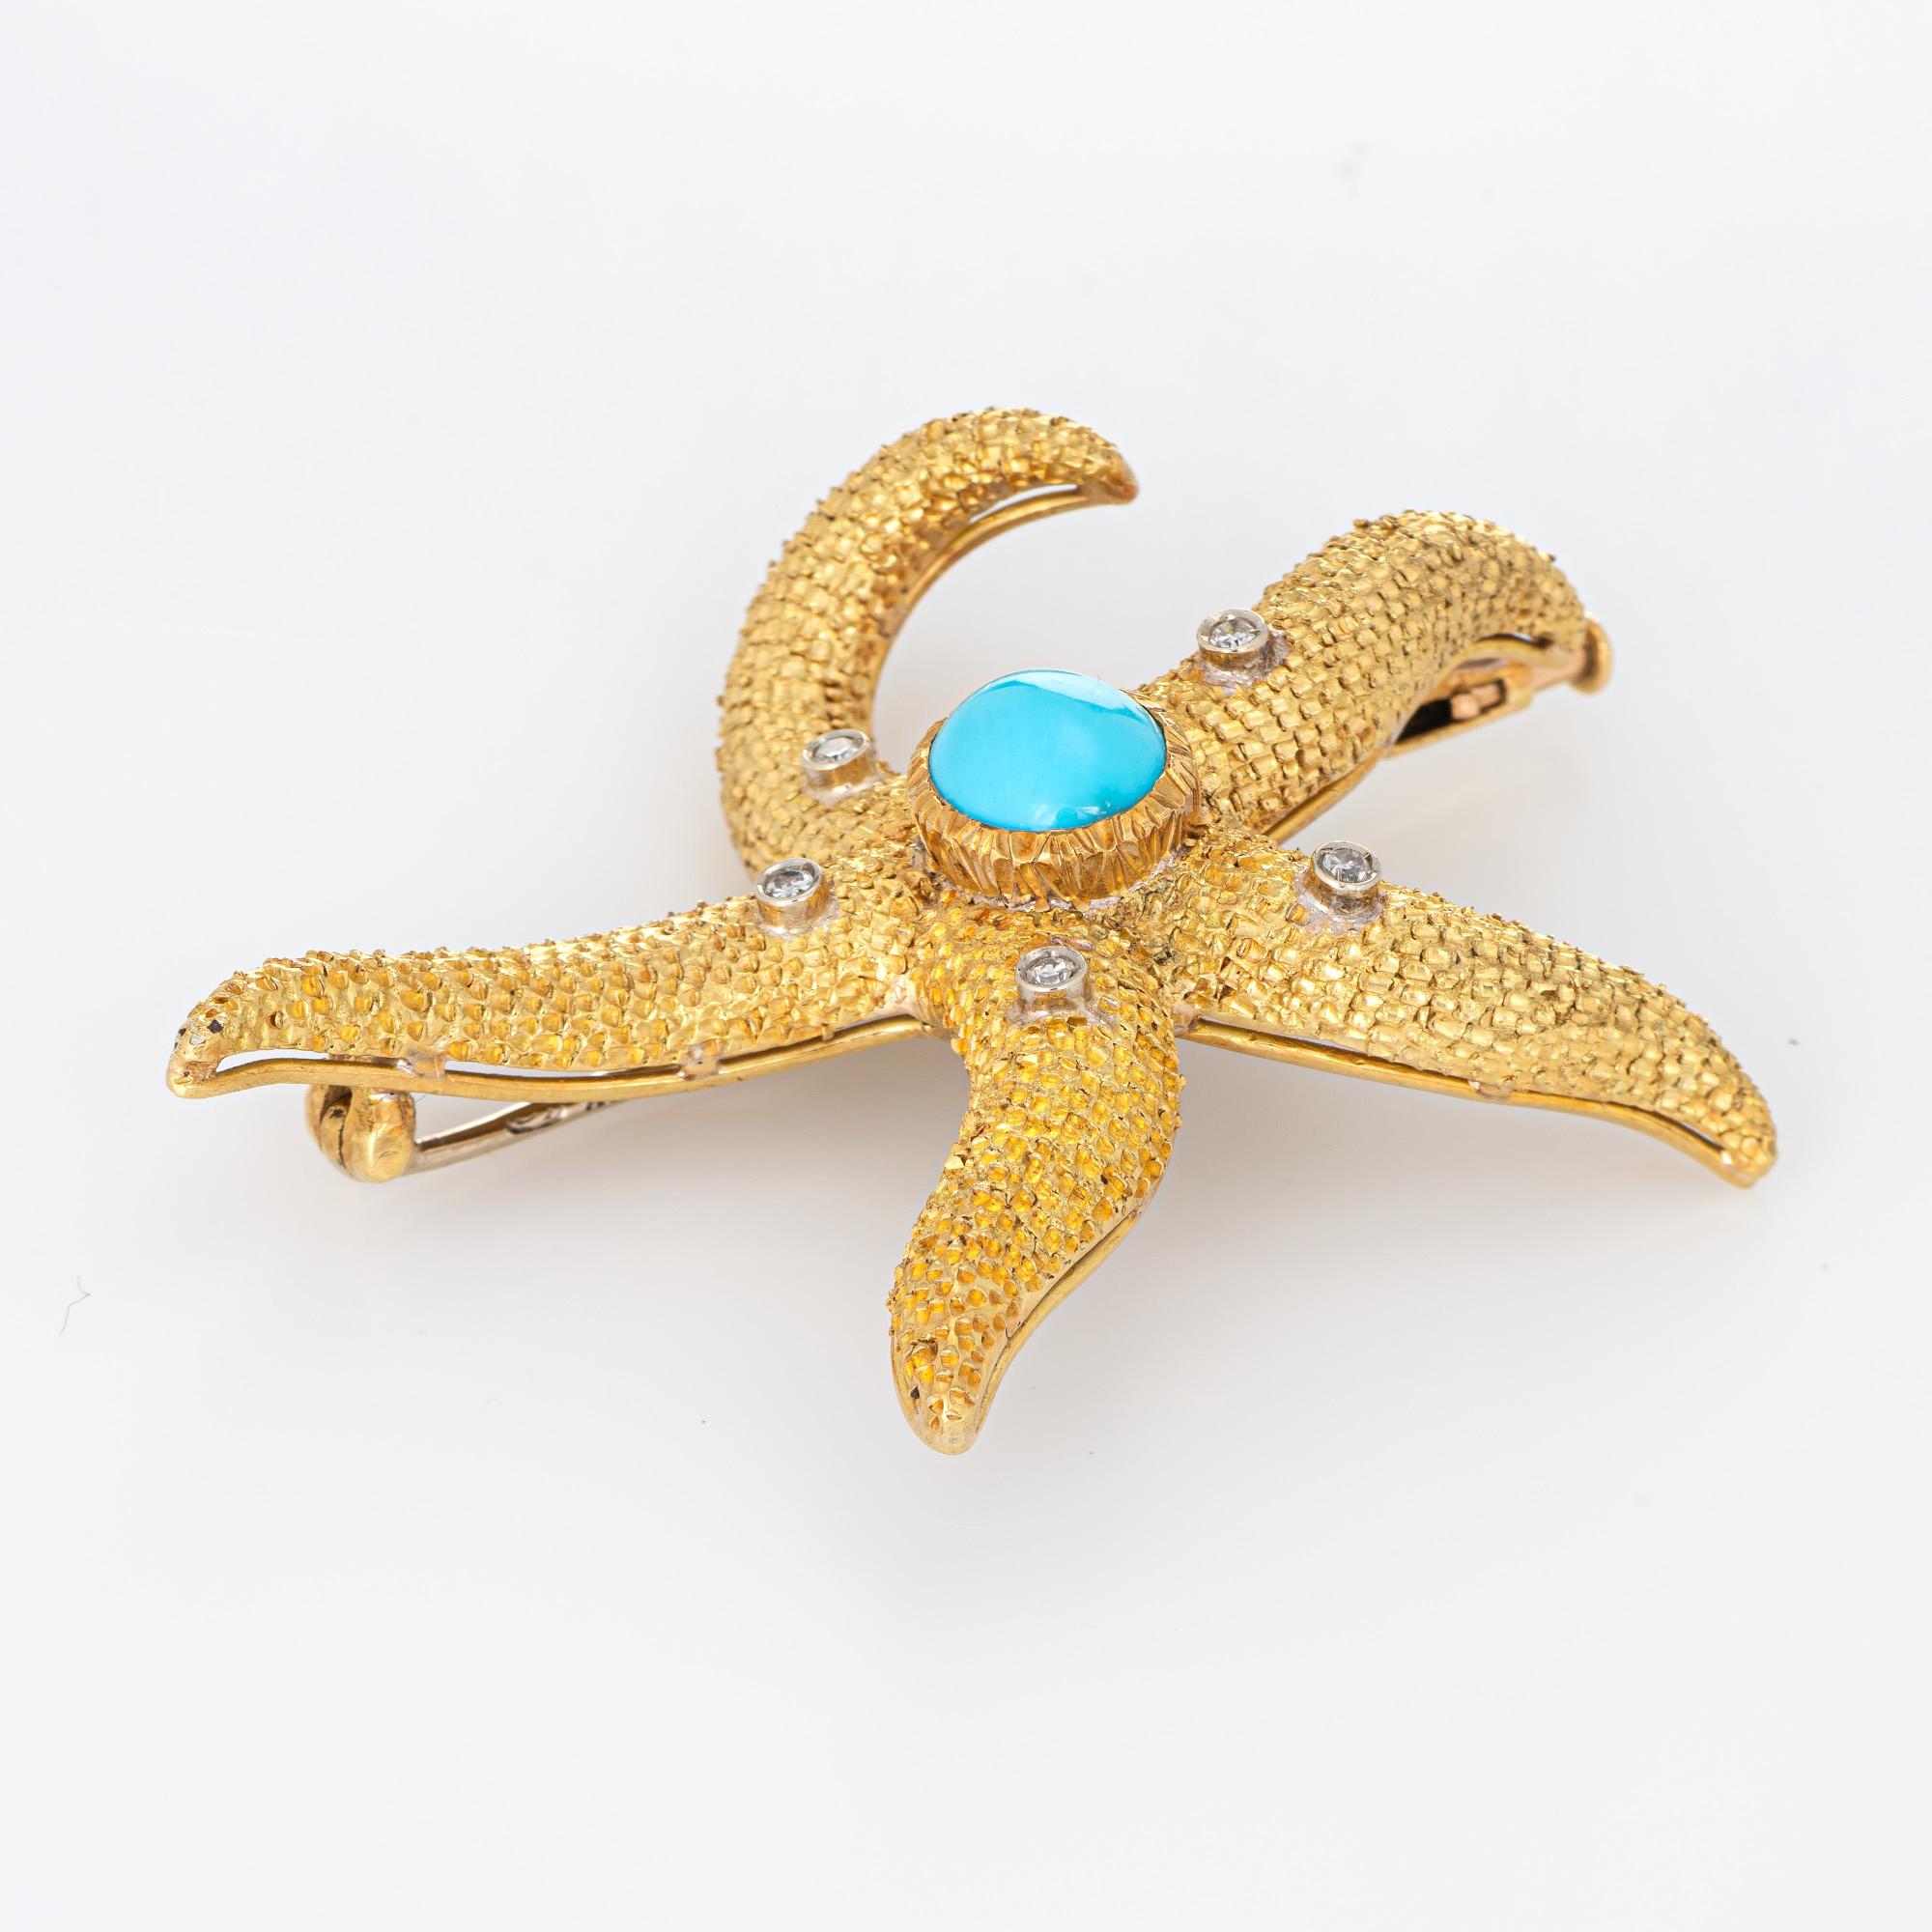 Finely detailed vintage starfish turquoise& diamond brooch crafted in 18k yellow gold.  

Diamonds total an estimated 0.05 carats (estimated at H-I color and SI1-2 clarity). The cabochon cut turquoise measures 8mm x 7mm. The turquoise is in